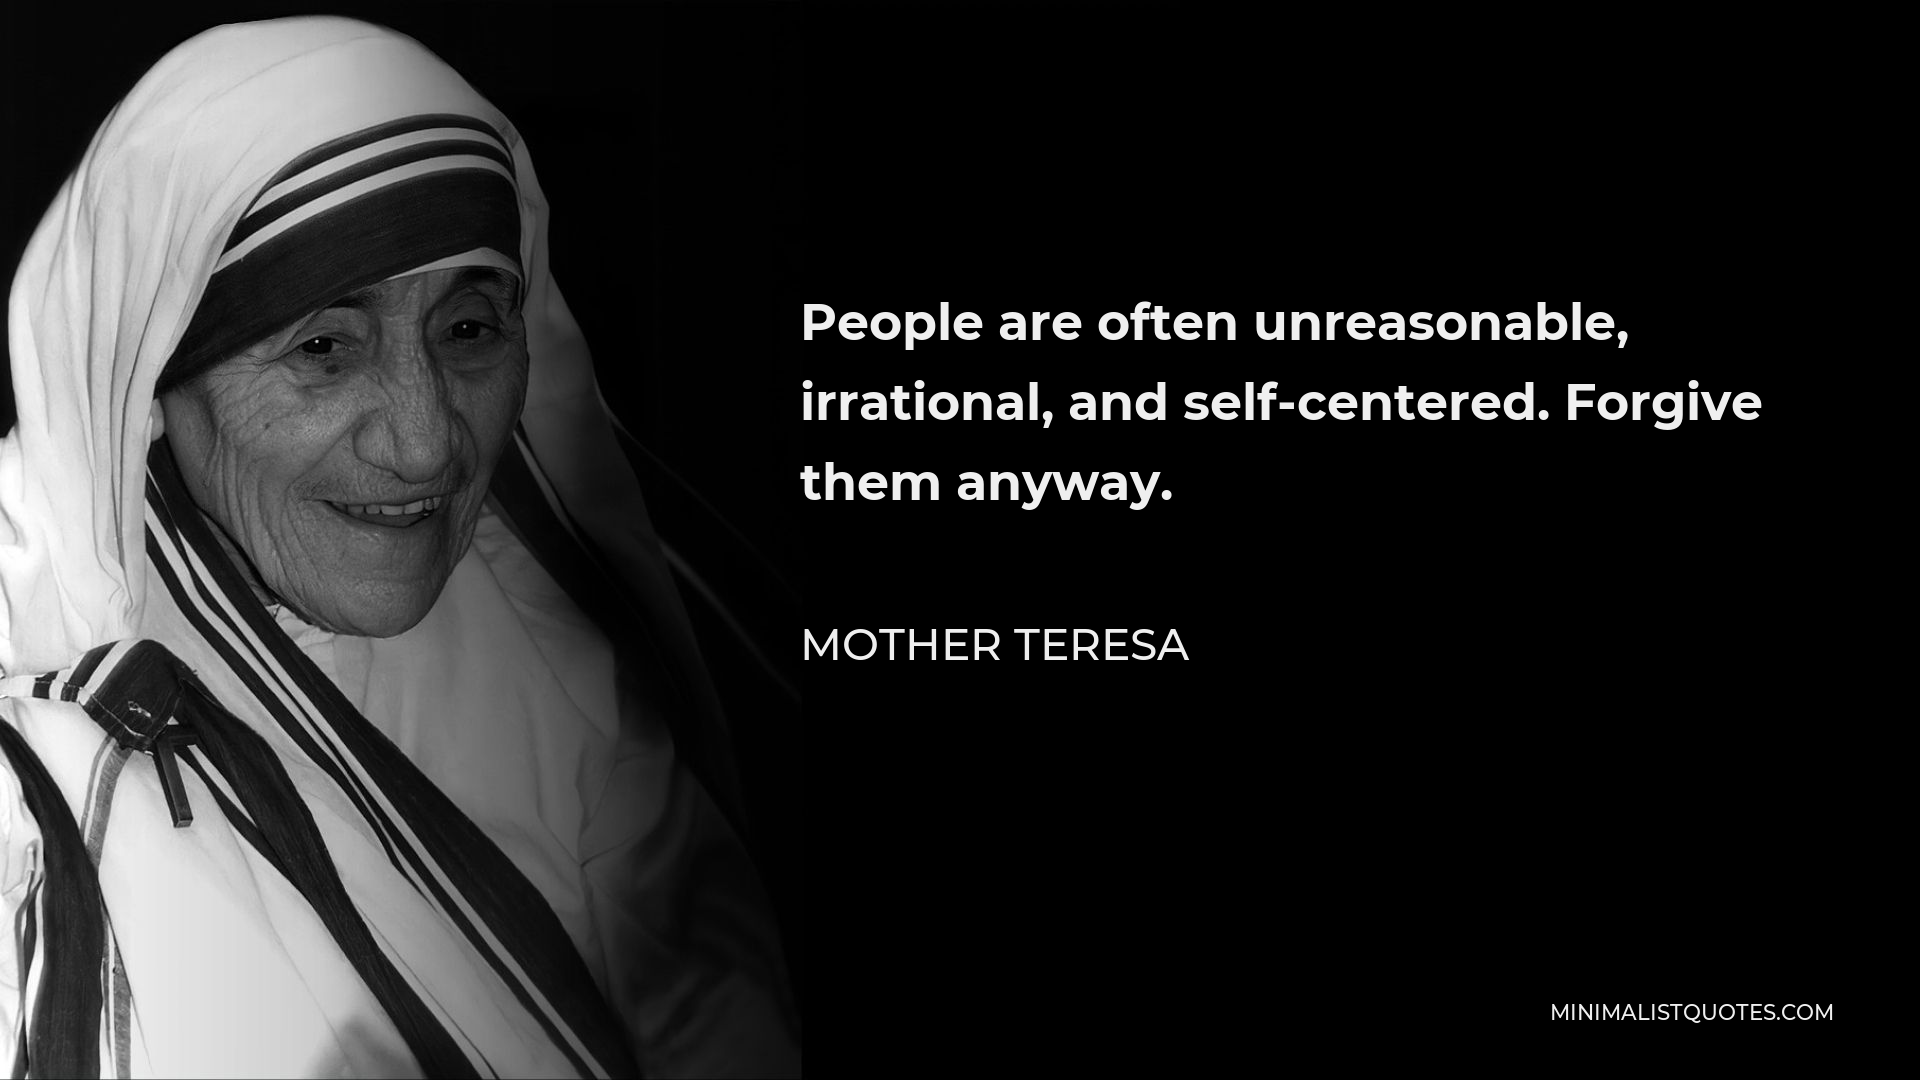 Mother Teresa Quote - People are often unreasonable, irrational, and self-centered. Forgive them anyway.